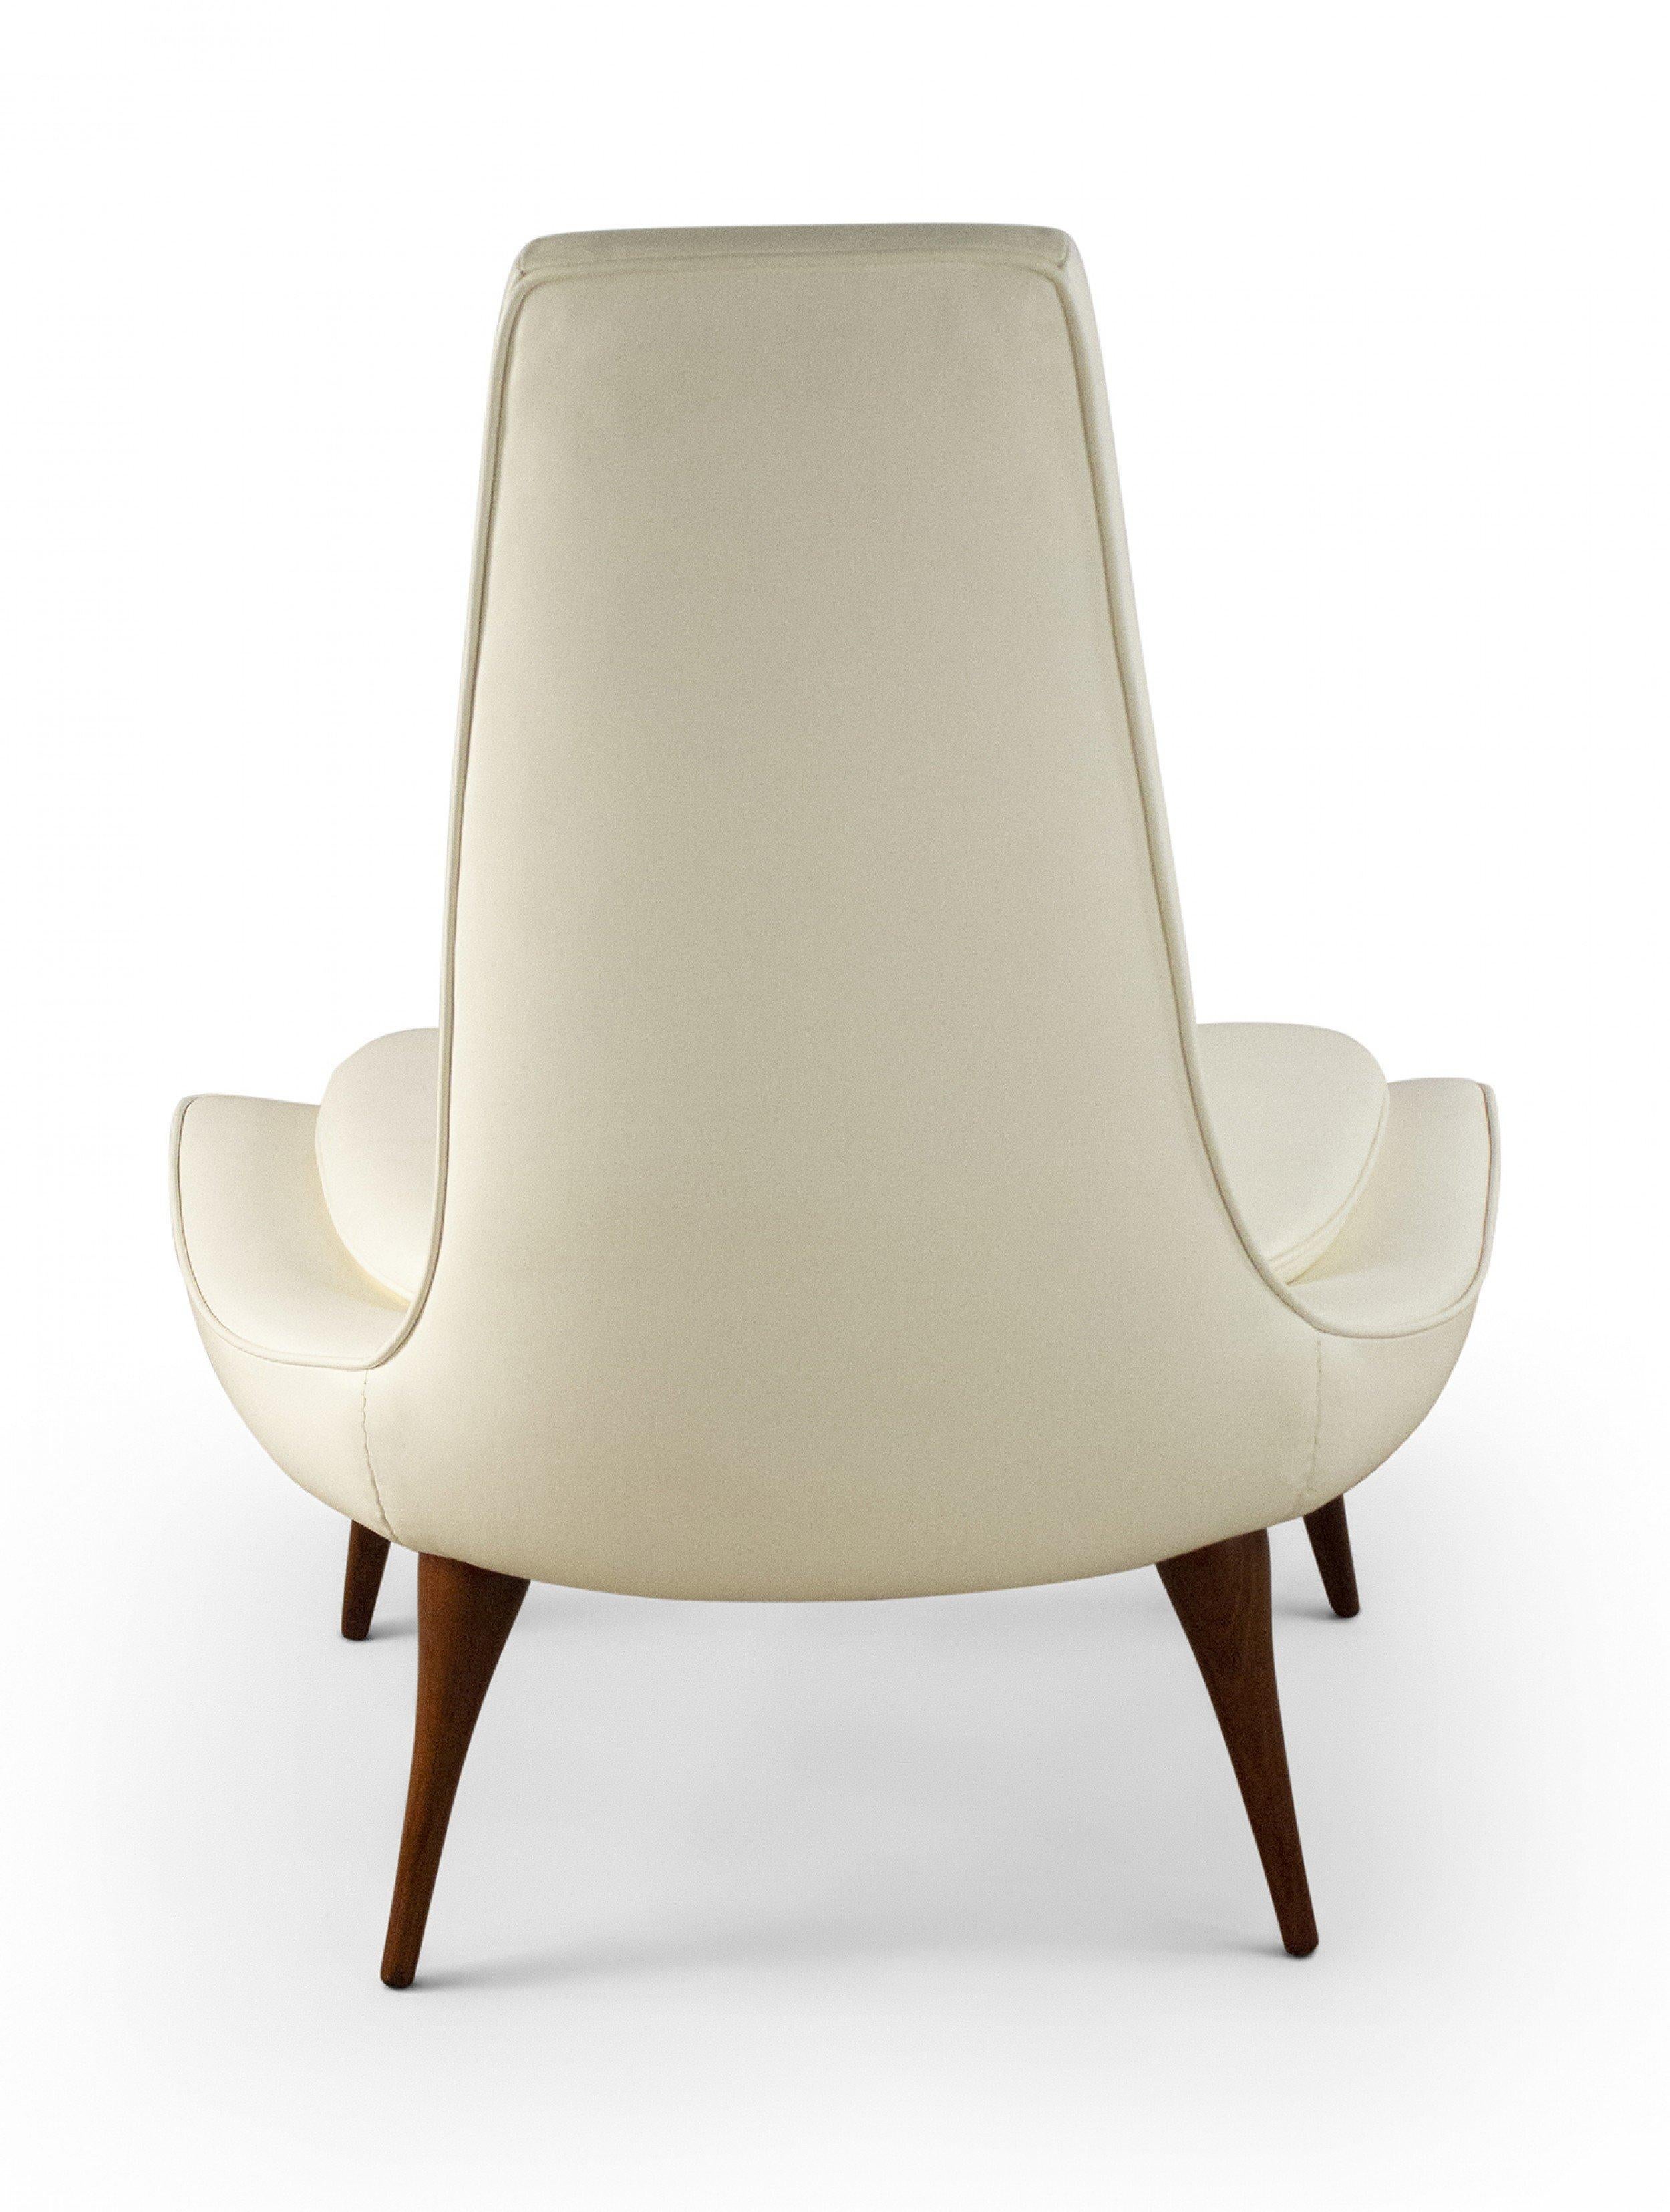 20th Century Pair of Midcentury Karpen Walnut Lounge Chairs with White Vinyl For Sale